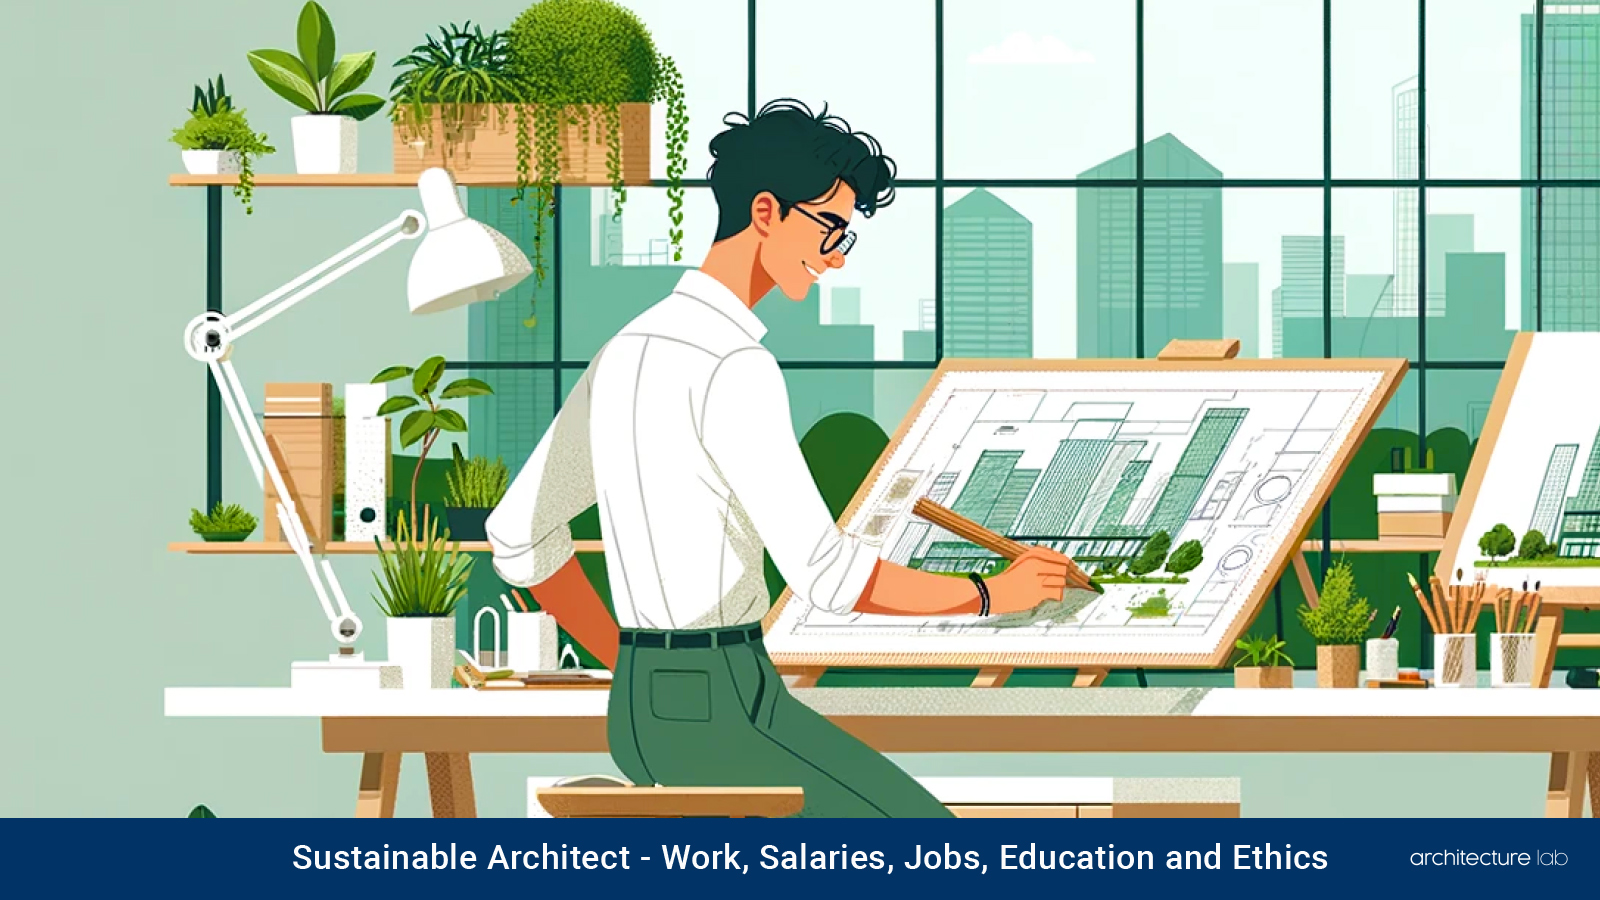 Sustainable design architect: work, salaries, jobs, education and ethics